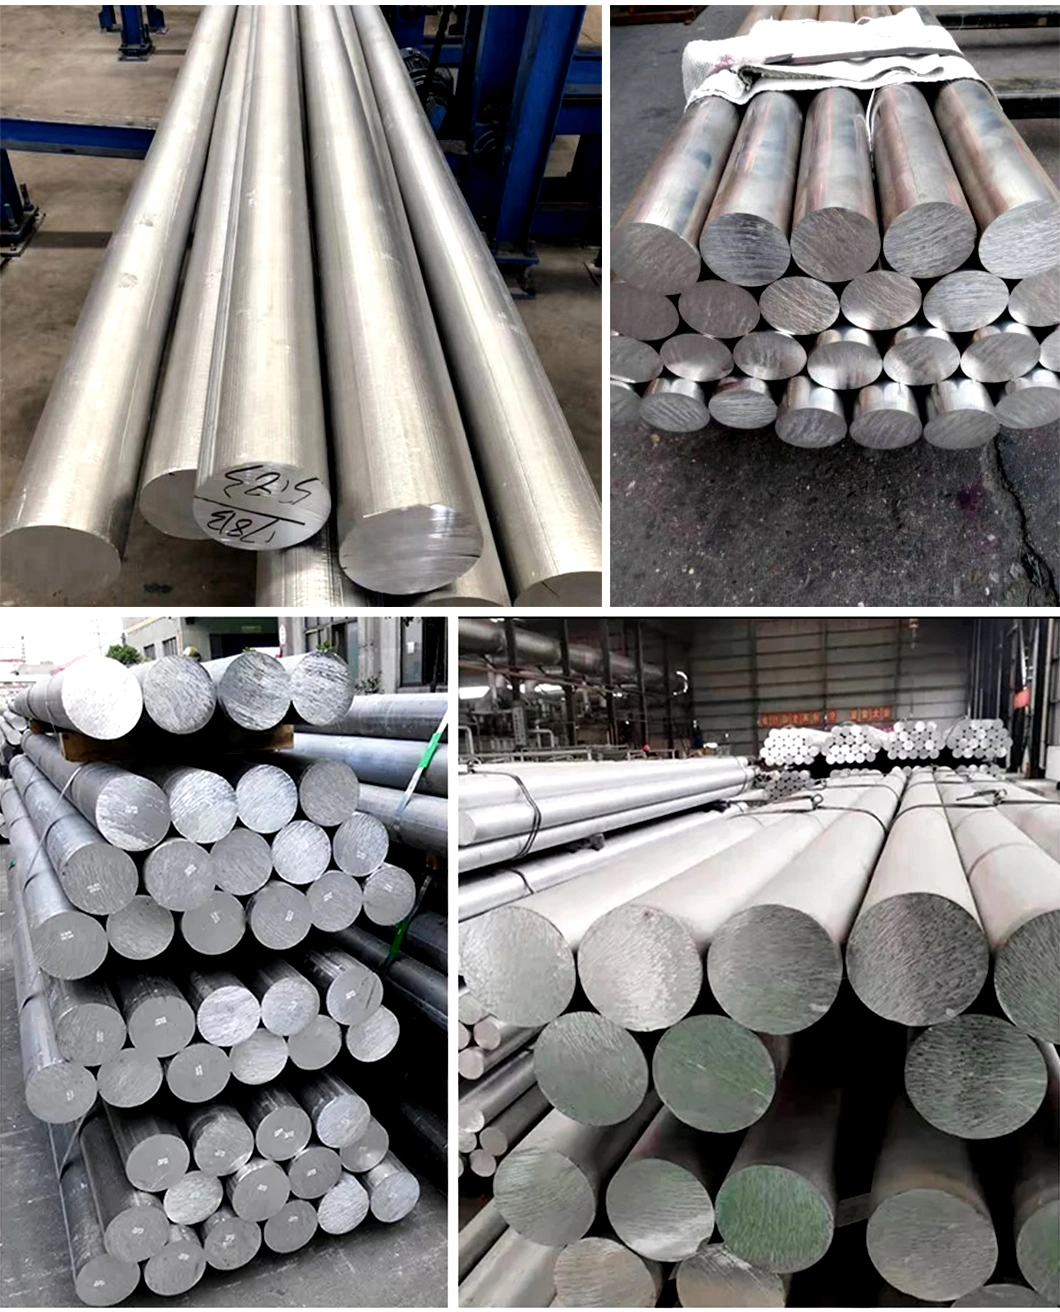 High Quality Pure ASTM 1050 Aluminum Bar Rod for Industry